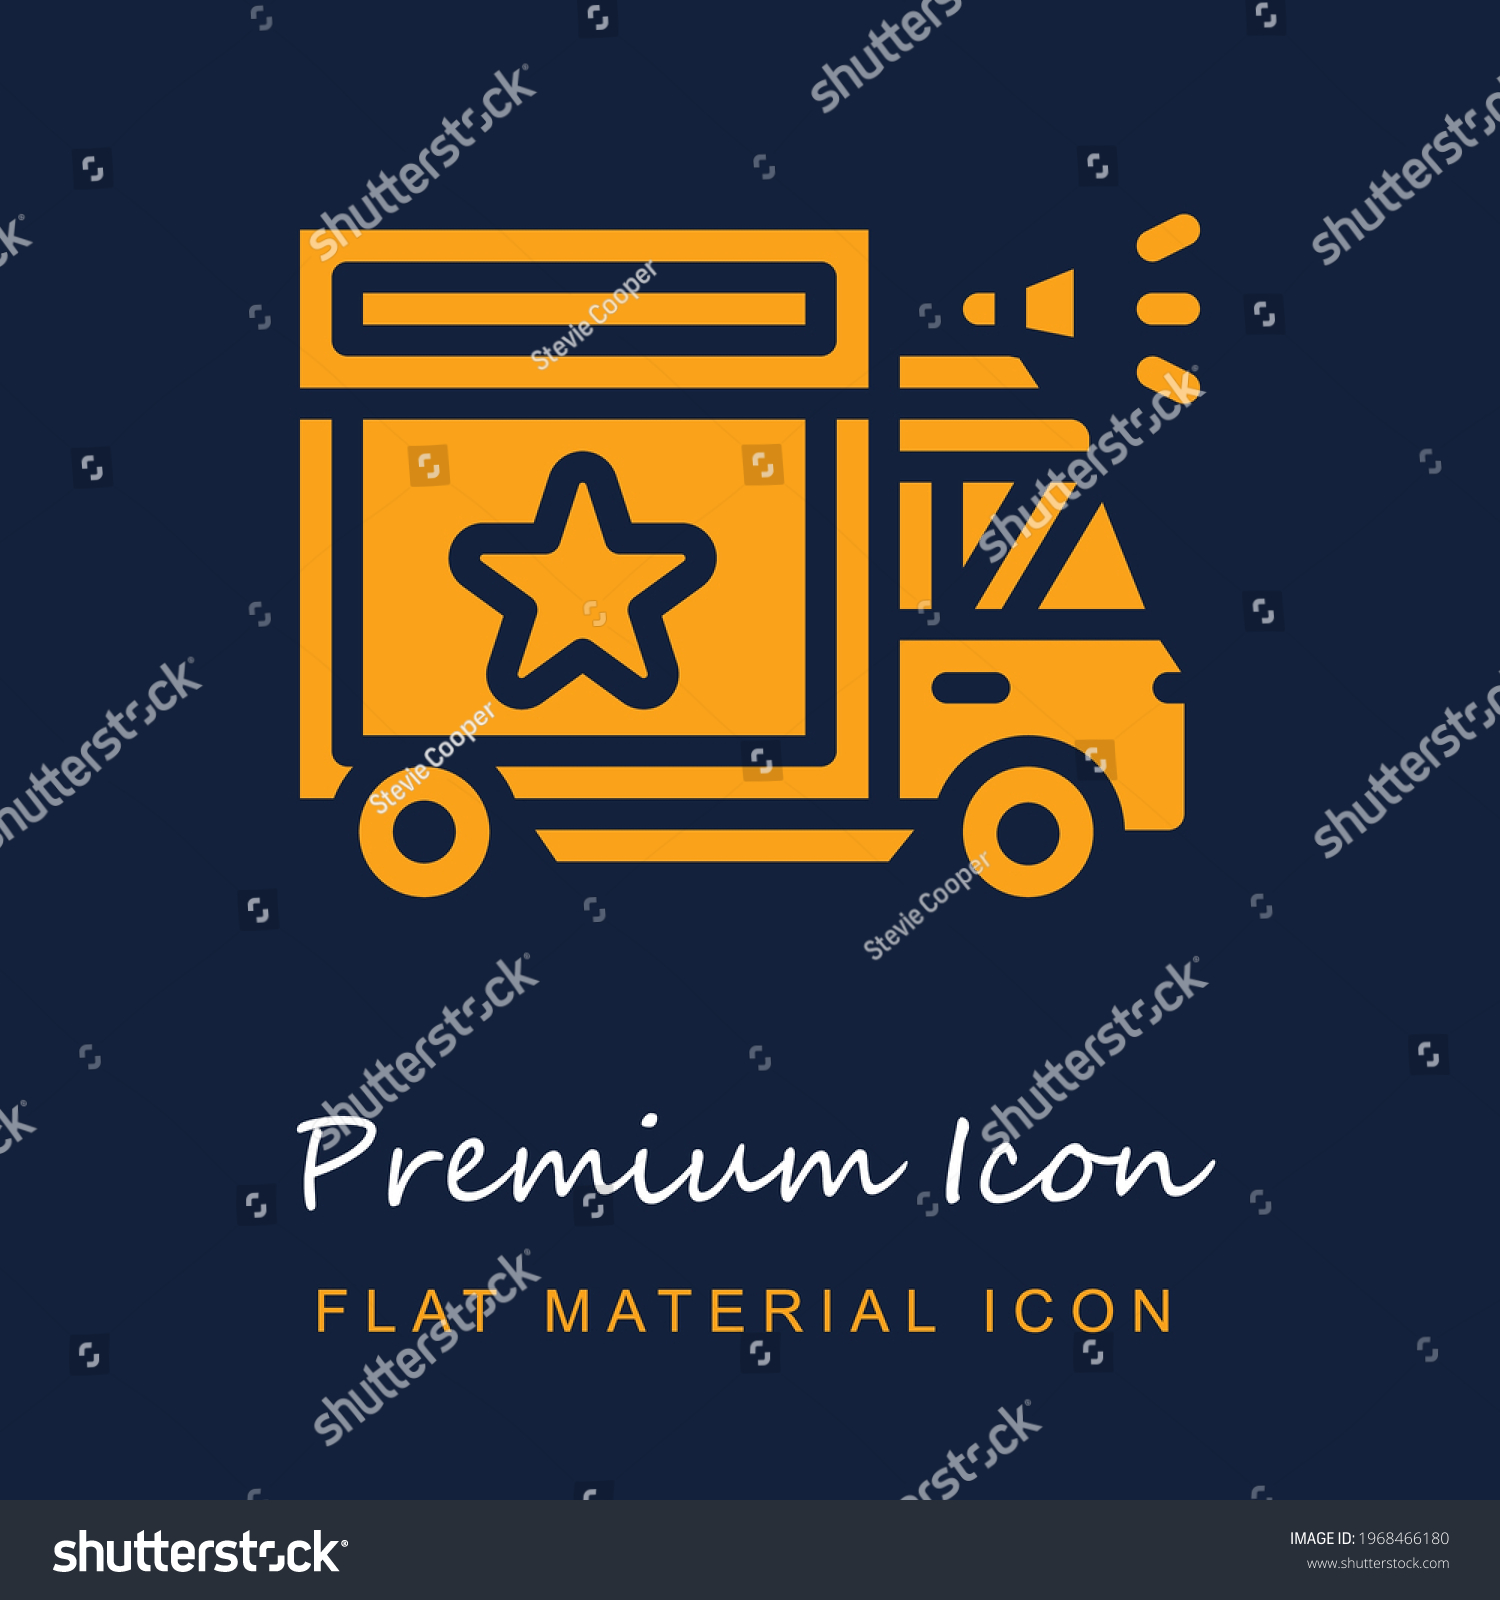 SVG of Van premium material ui ux isolated vector icon in navy blue and orange colors svg